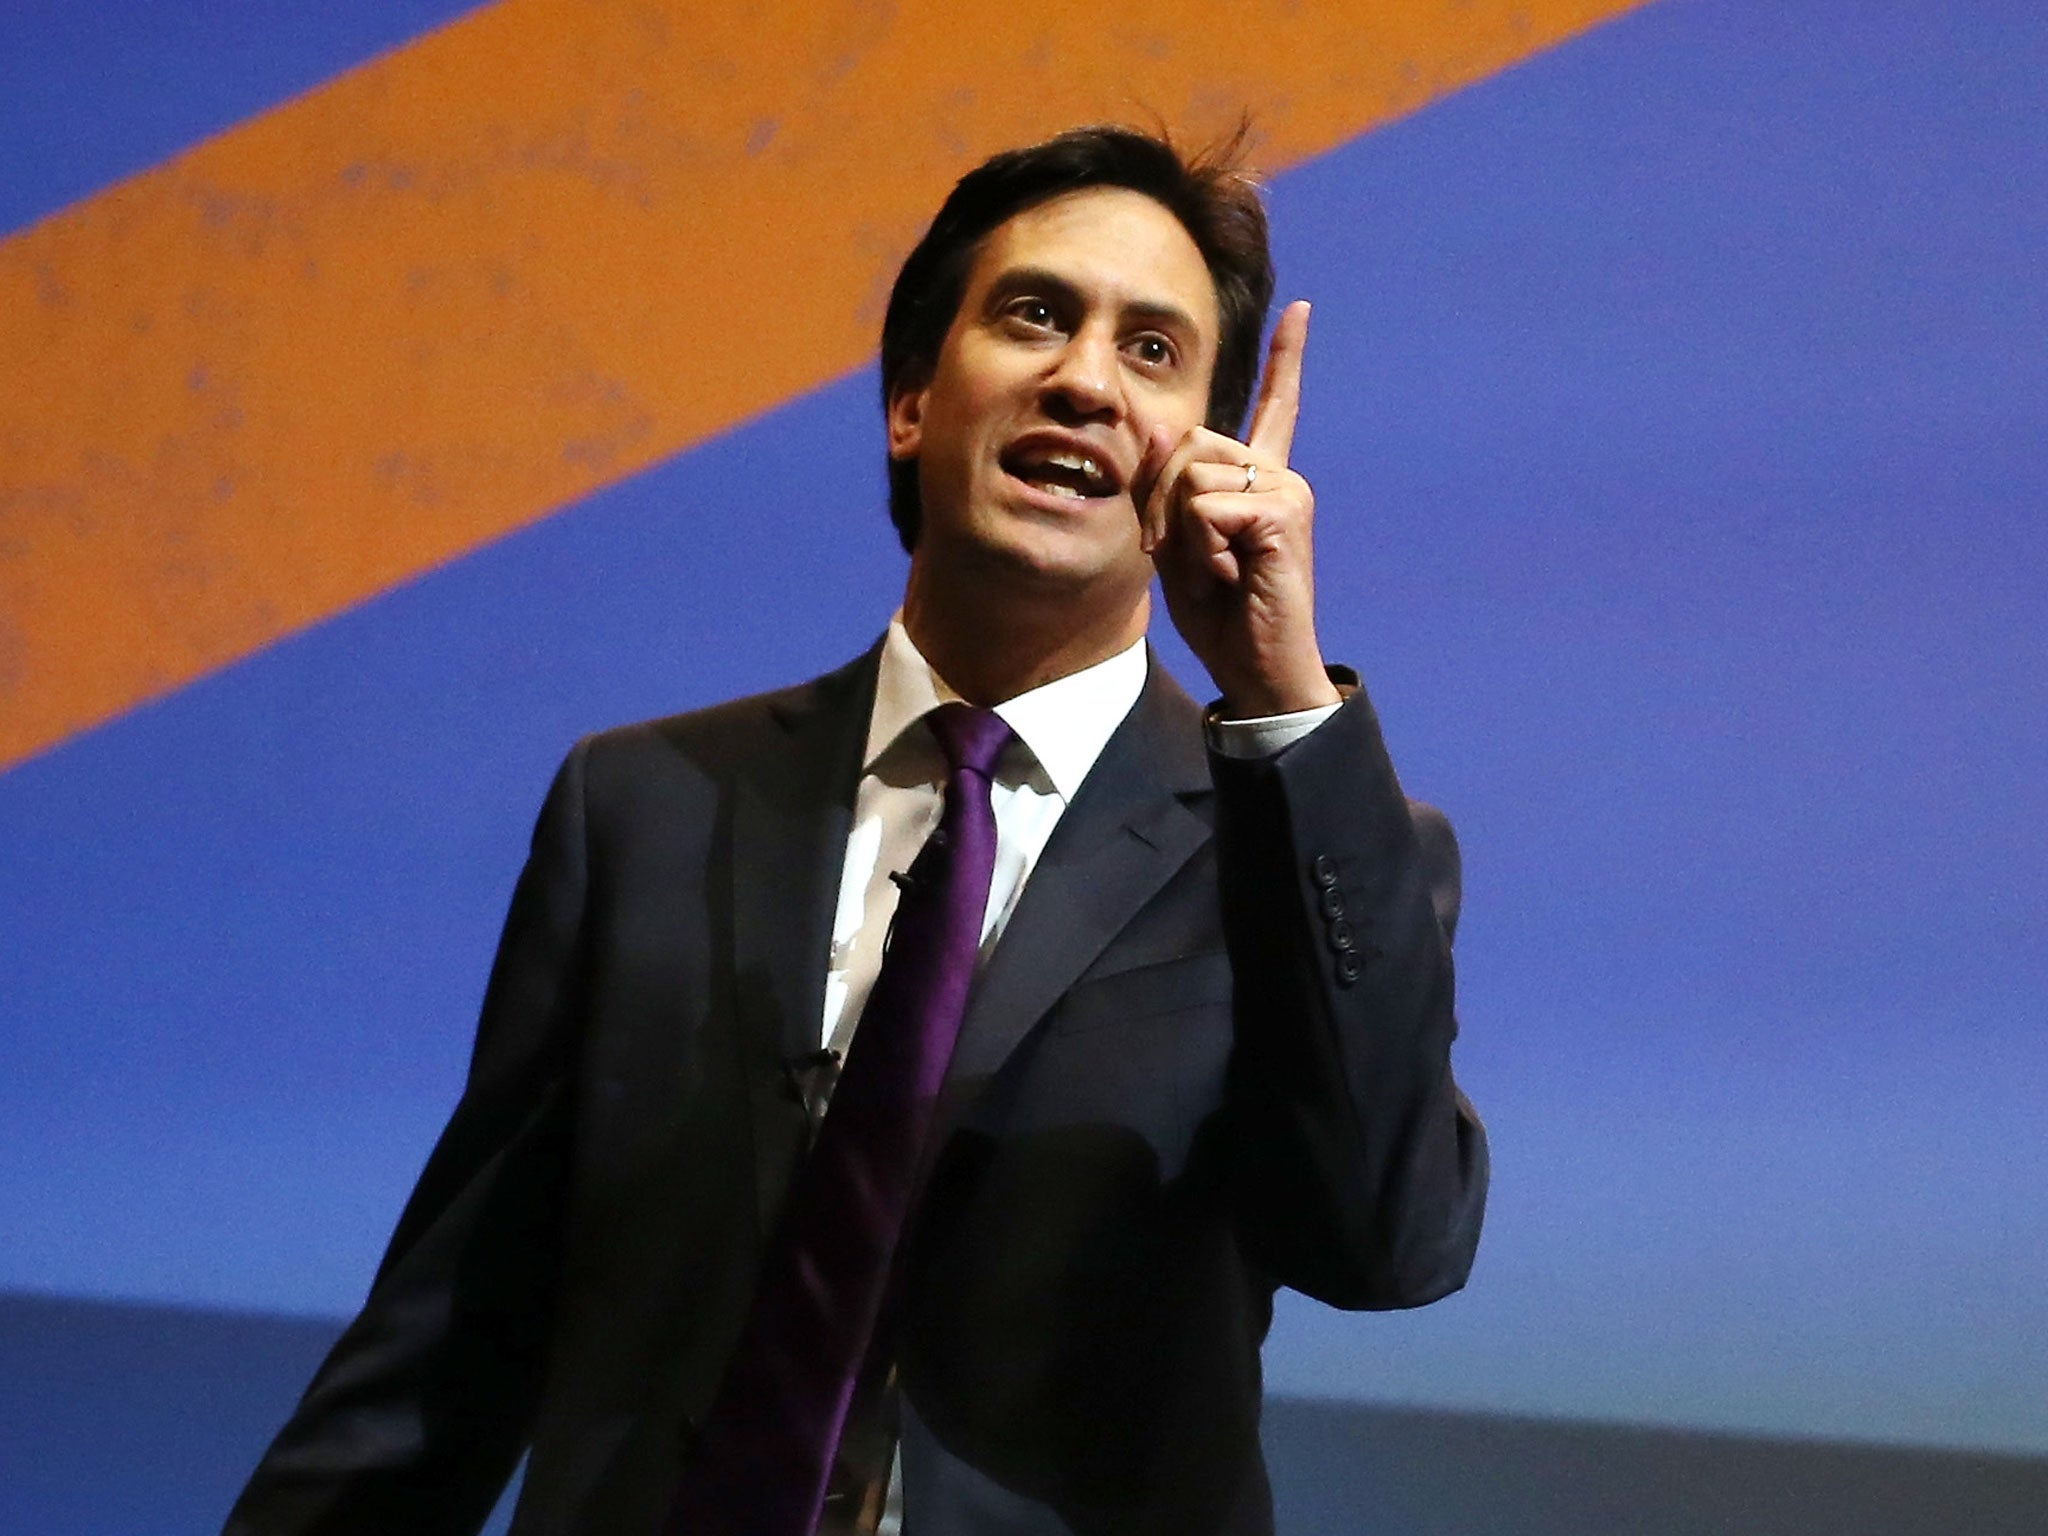 Labour leader Ed Miliband will put his final proposals to a special Labour conference on 1 March